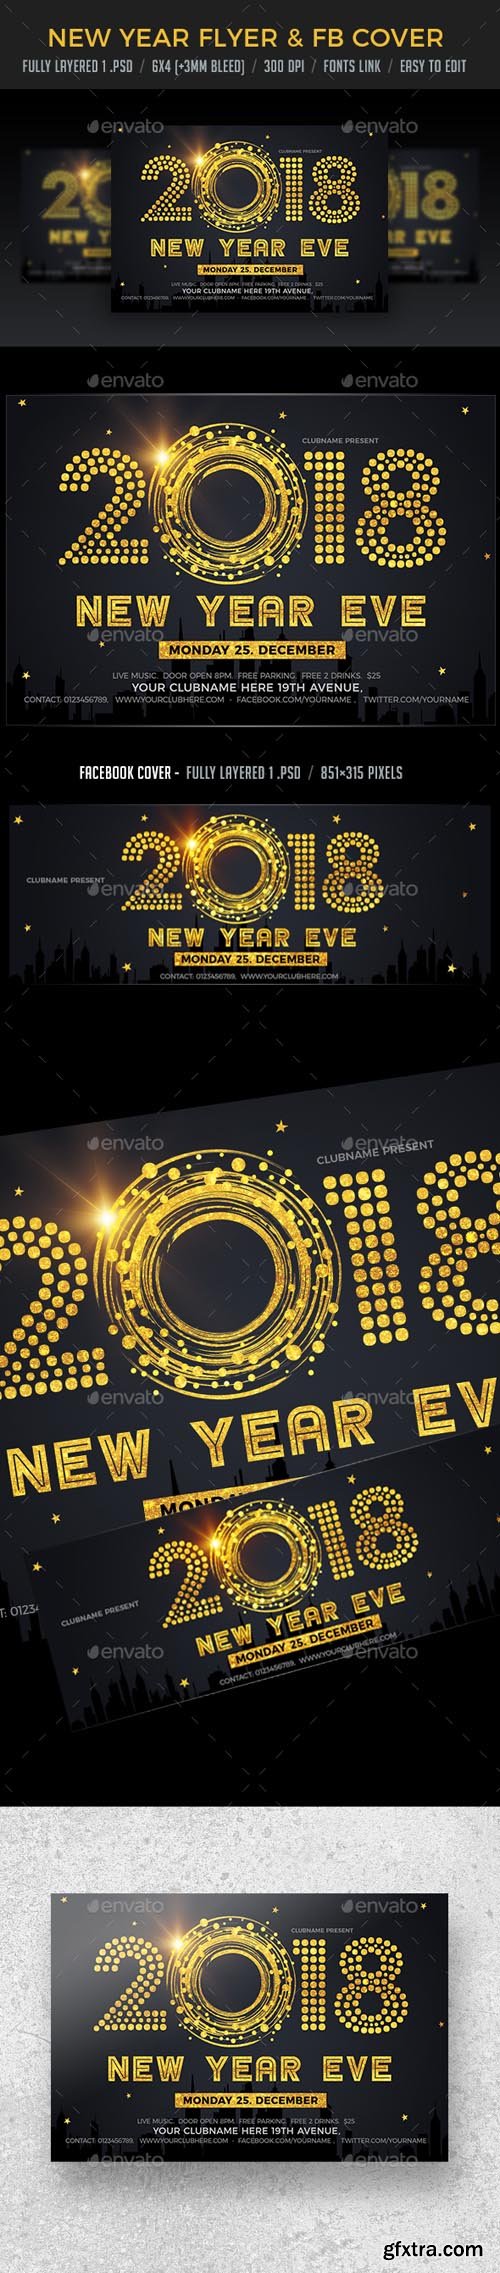 GR - New Year Eve Flyer & FB Cover 21045247